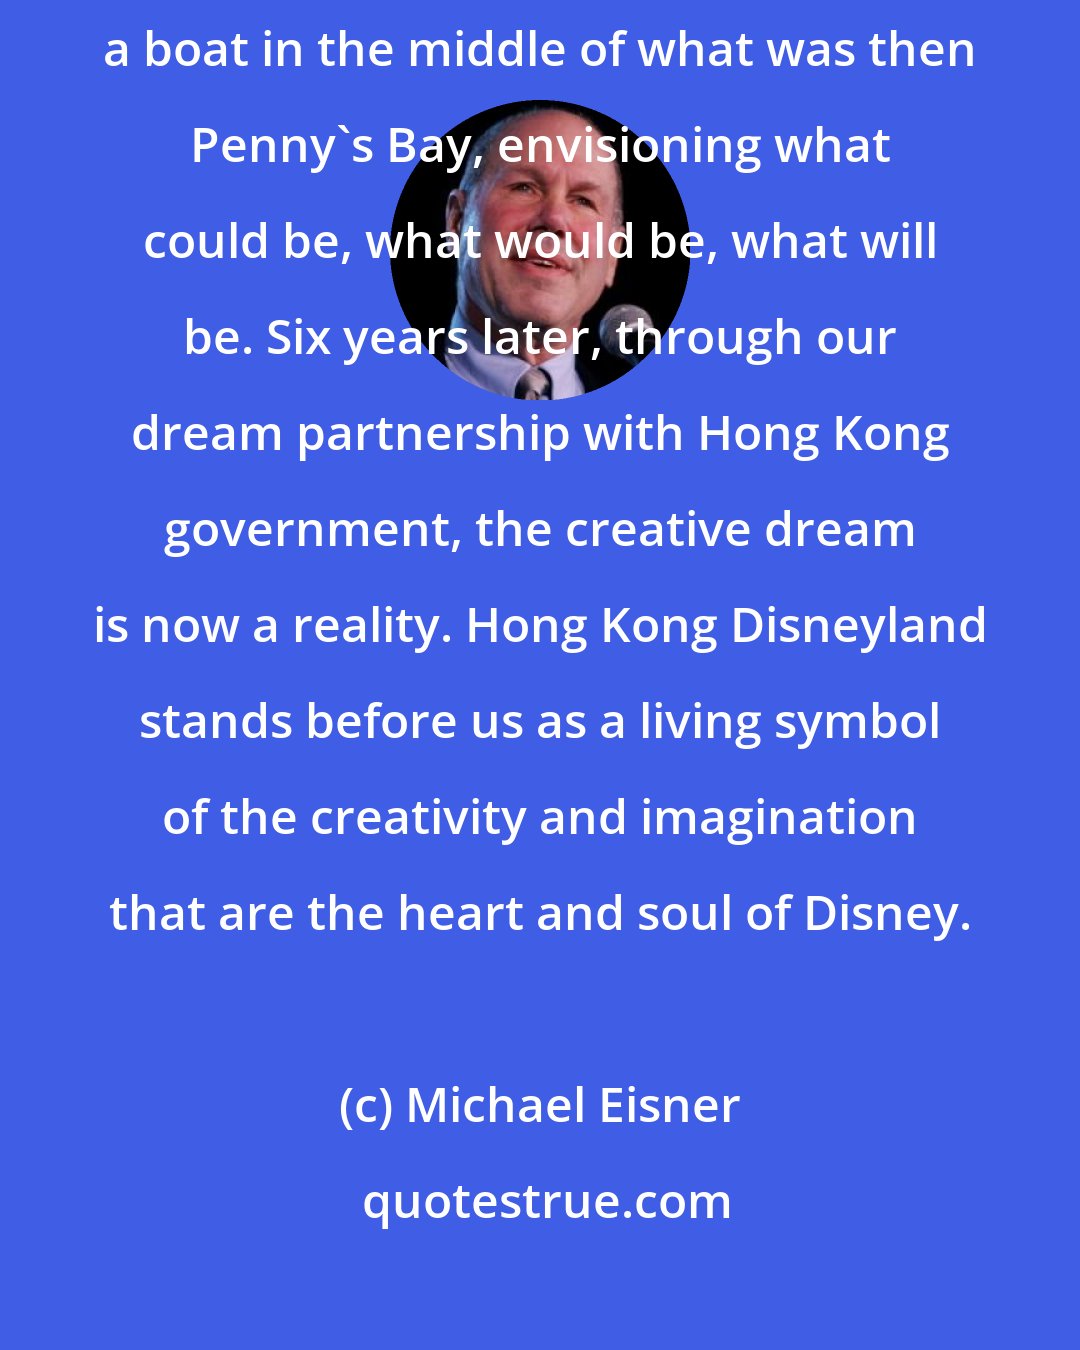 Michael Eisner: I remember the first time we stood in this spot. We were on the deck of a boat in the middle of what was then Penny's Bay, envisioning what could be, what would be, what will be. Six years later, through our dream partnership with Hong Kong government, the creative dream is now a reality. Hong Kong Disneyland stands before us as a living symbol of the creativity and imagination that are the heart and soul of Disney.